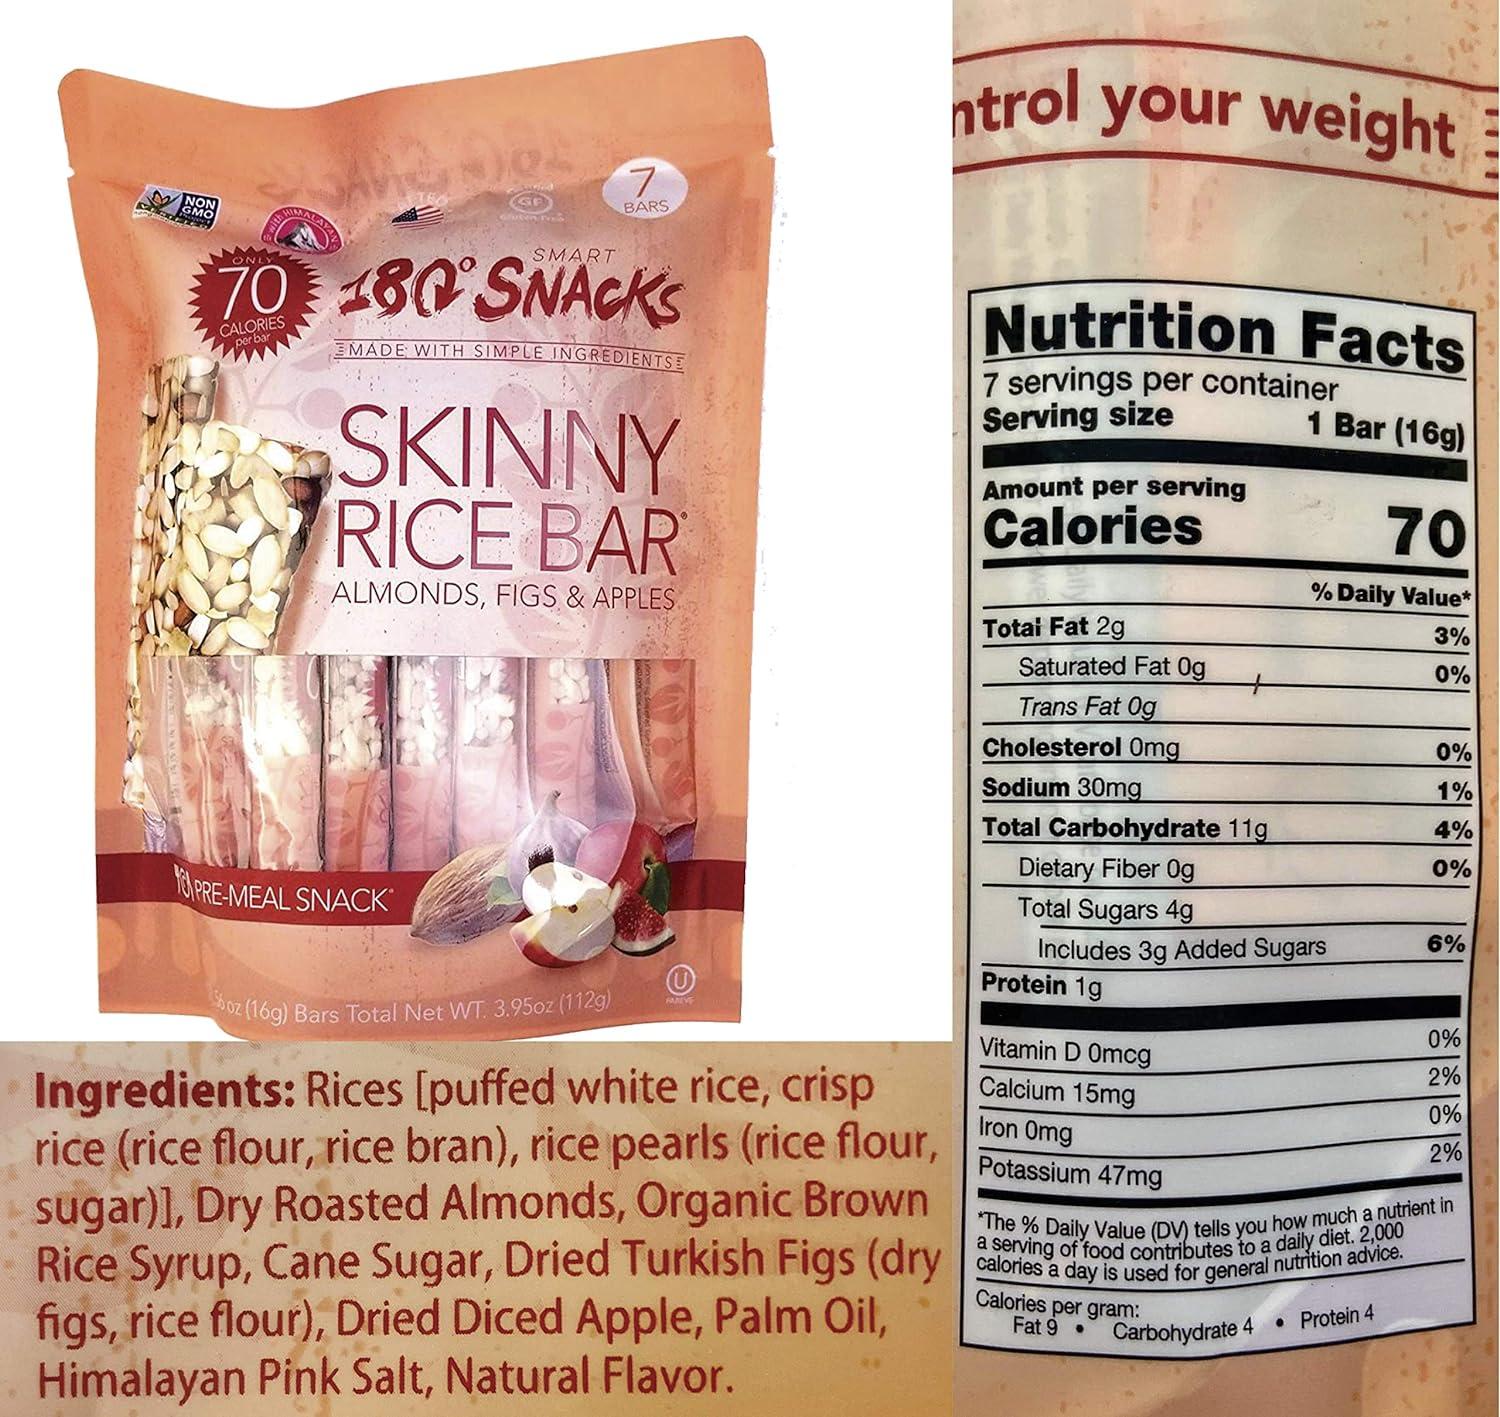  180 Snacks Skinny Rice Bars Bundle - Cranberry + Blueberry - Rice  Bars with Almonds and Himalayan Salt - Low Calorie Snacks, Only 70 Calories  - Non Gmo, Gluten-free Snacks for